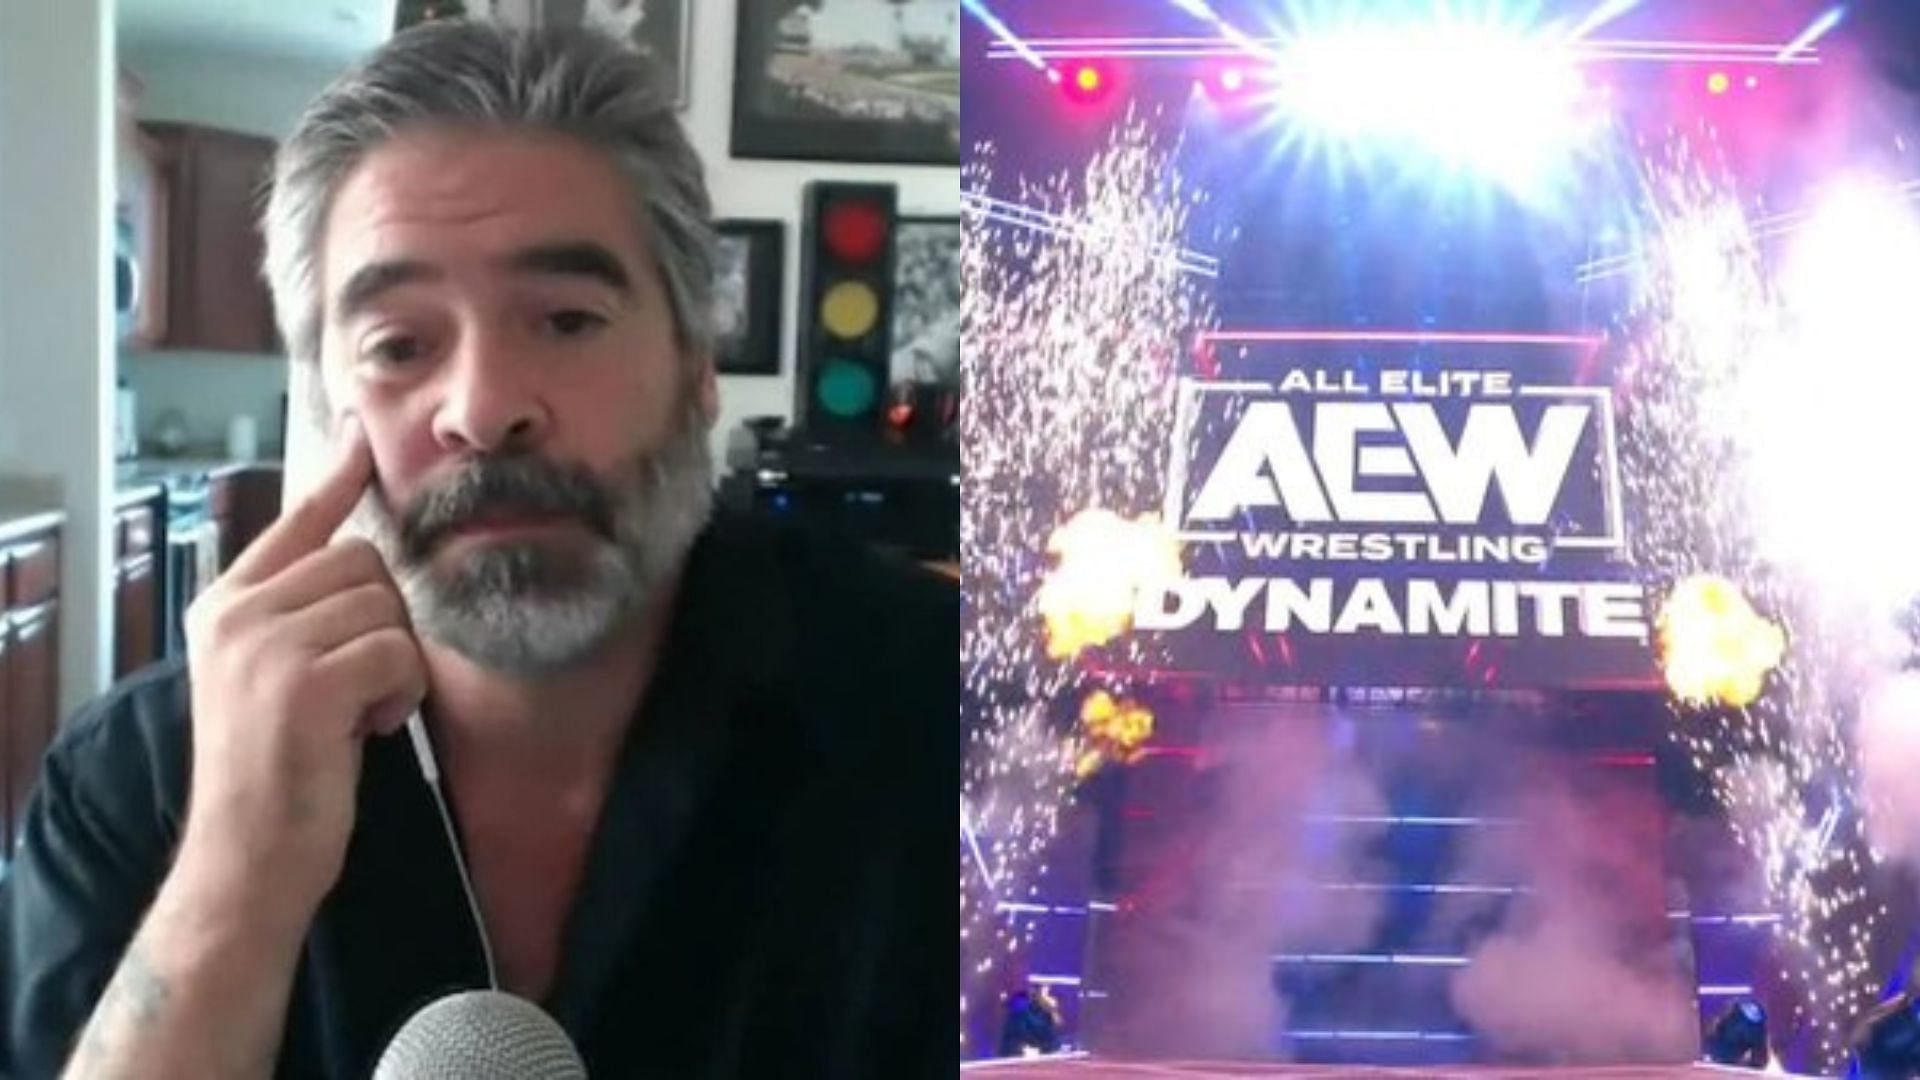 Vince Russo briefly discussed one of Cedric Alexander